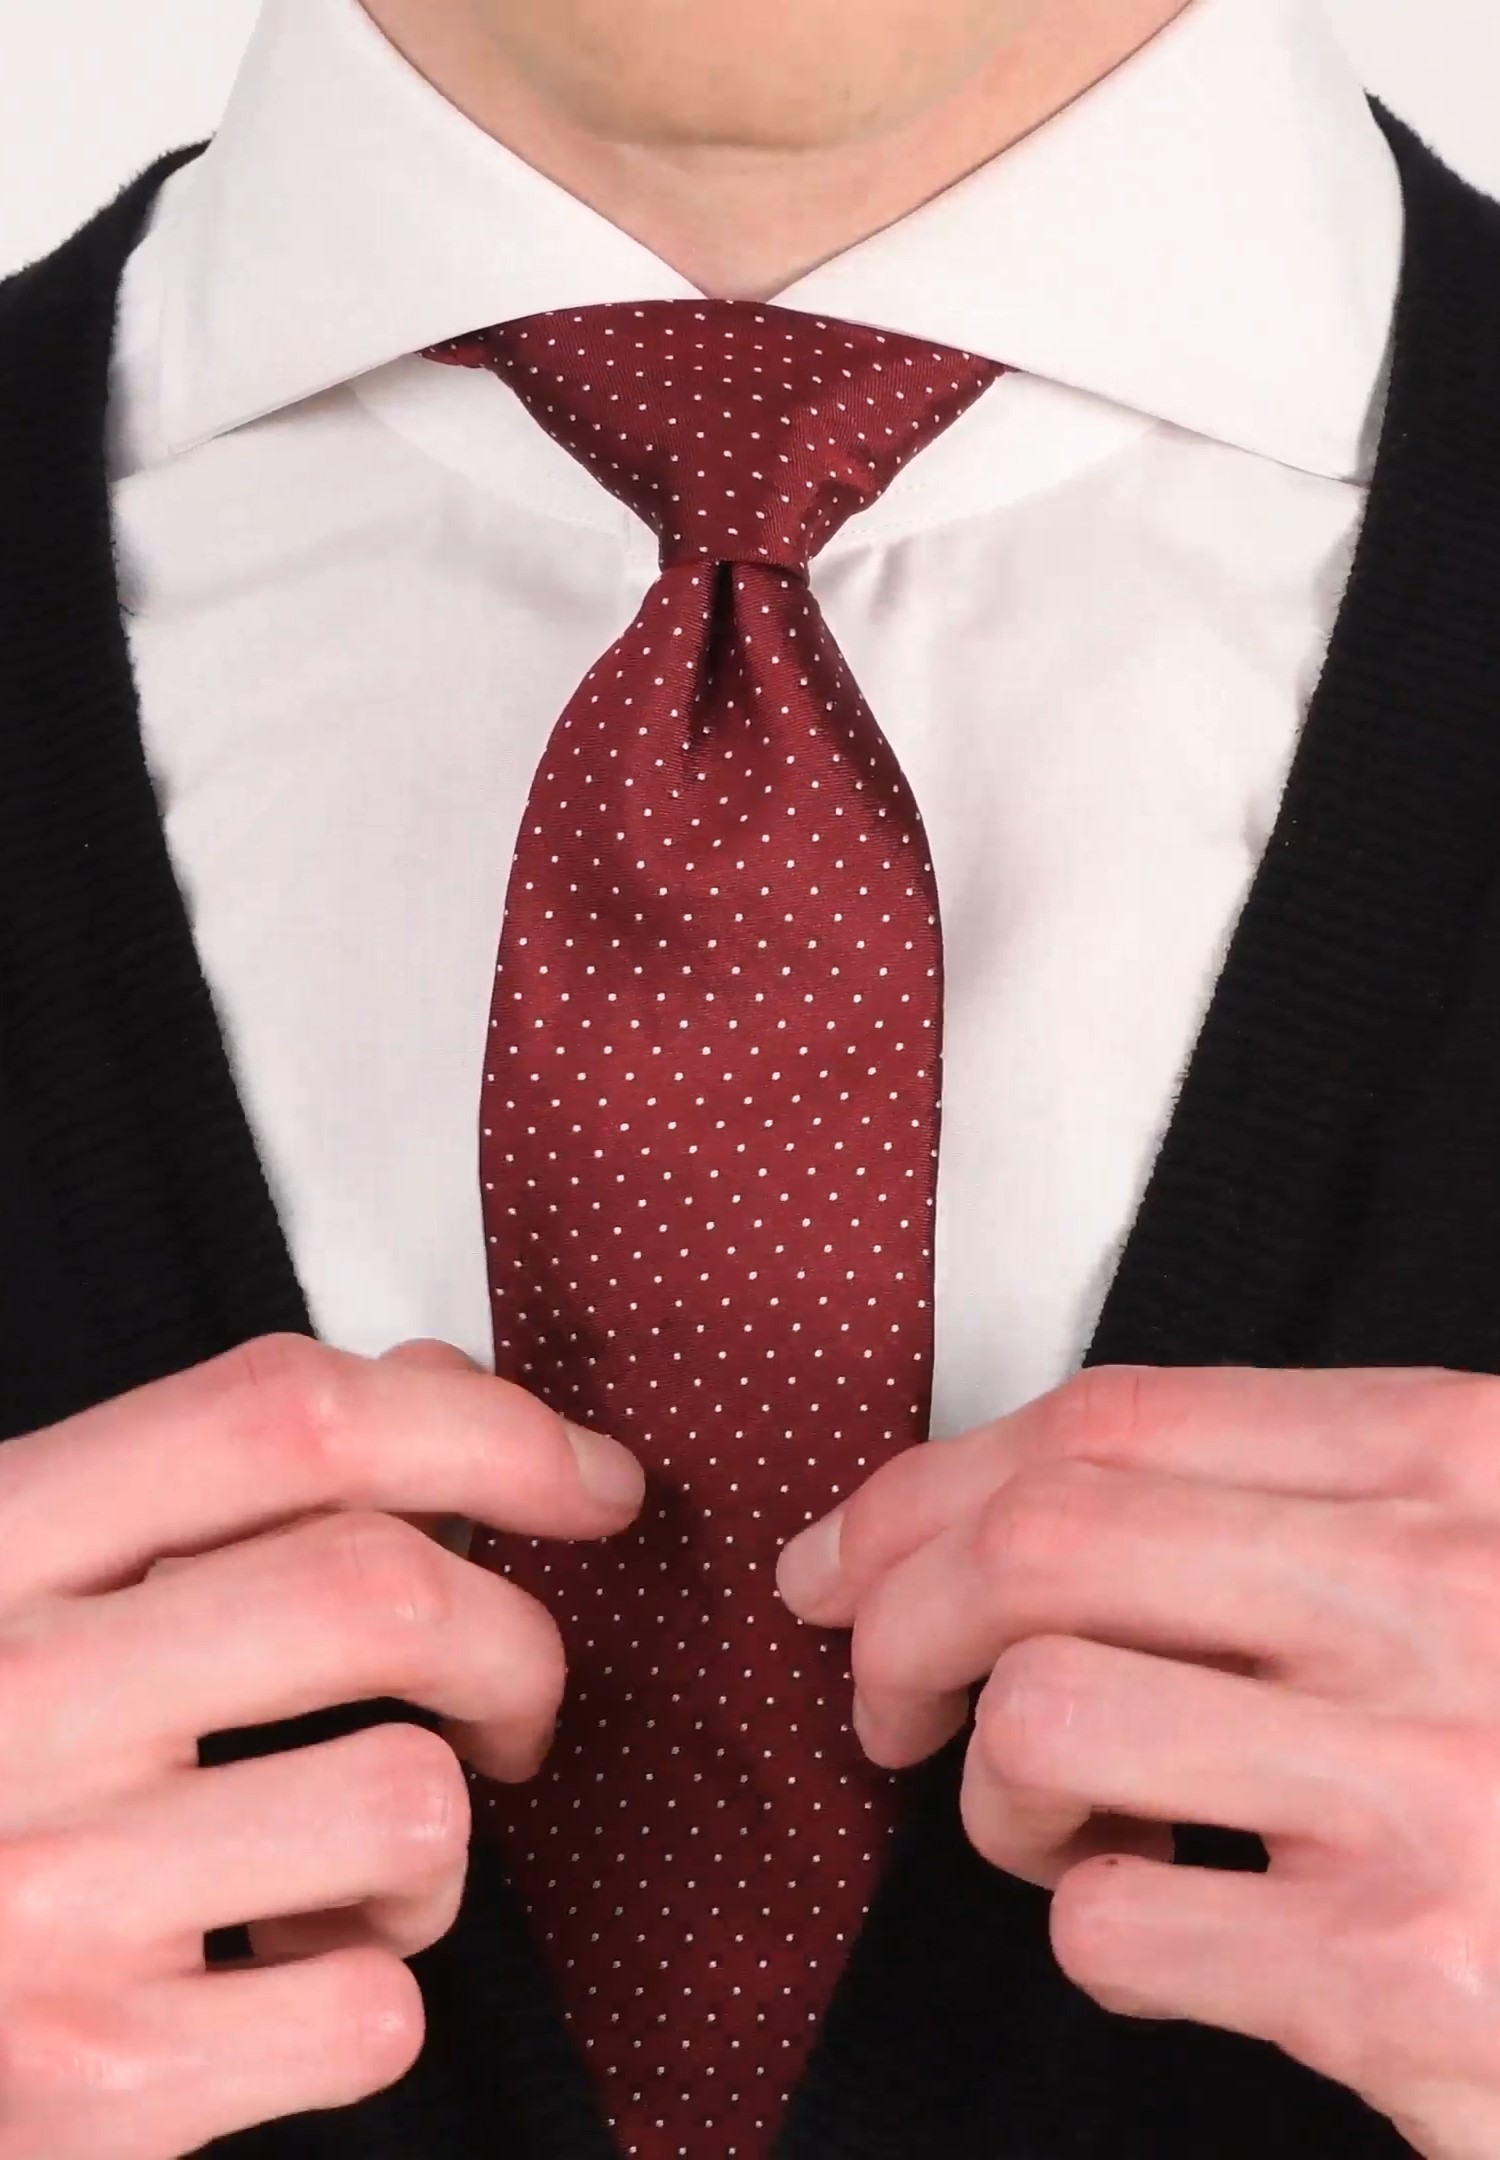 The Full Windsor is one of the larger tie knots